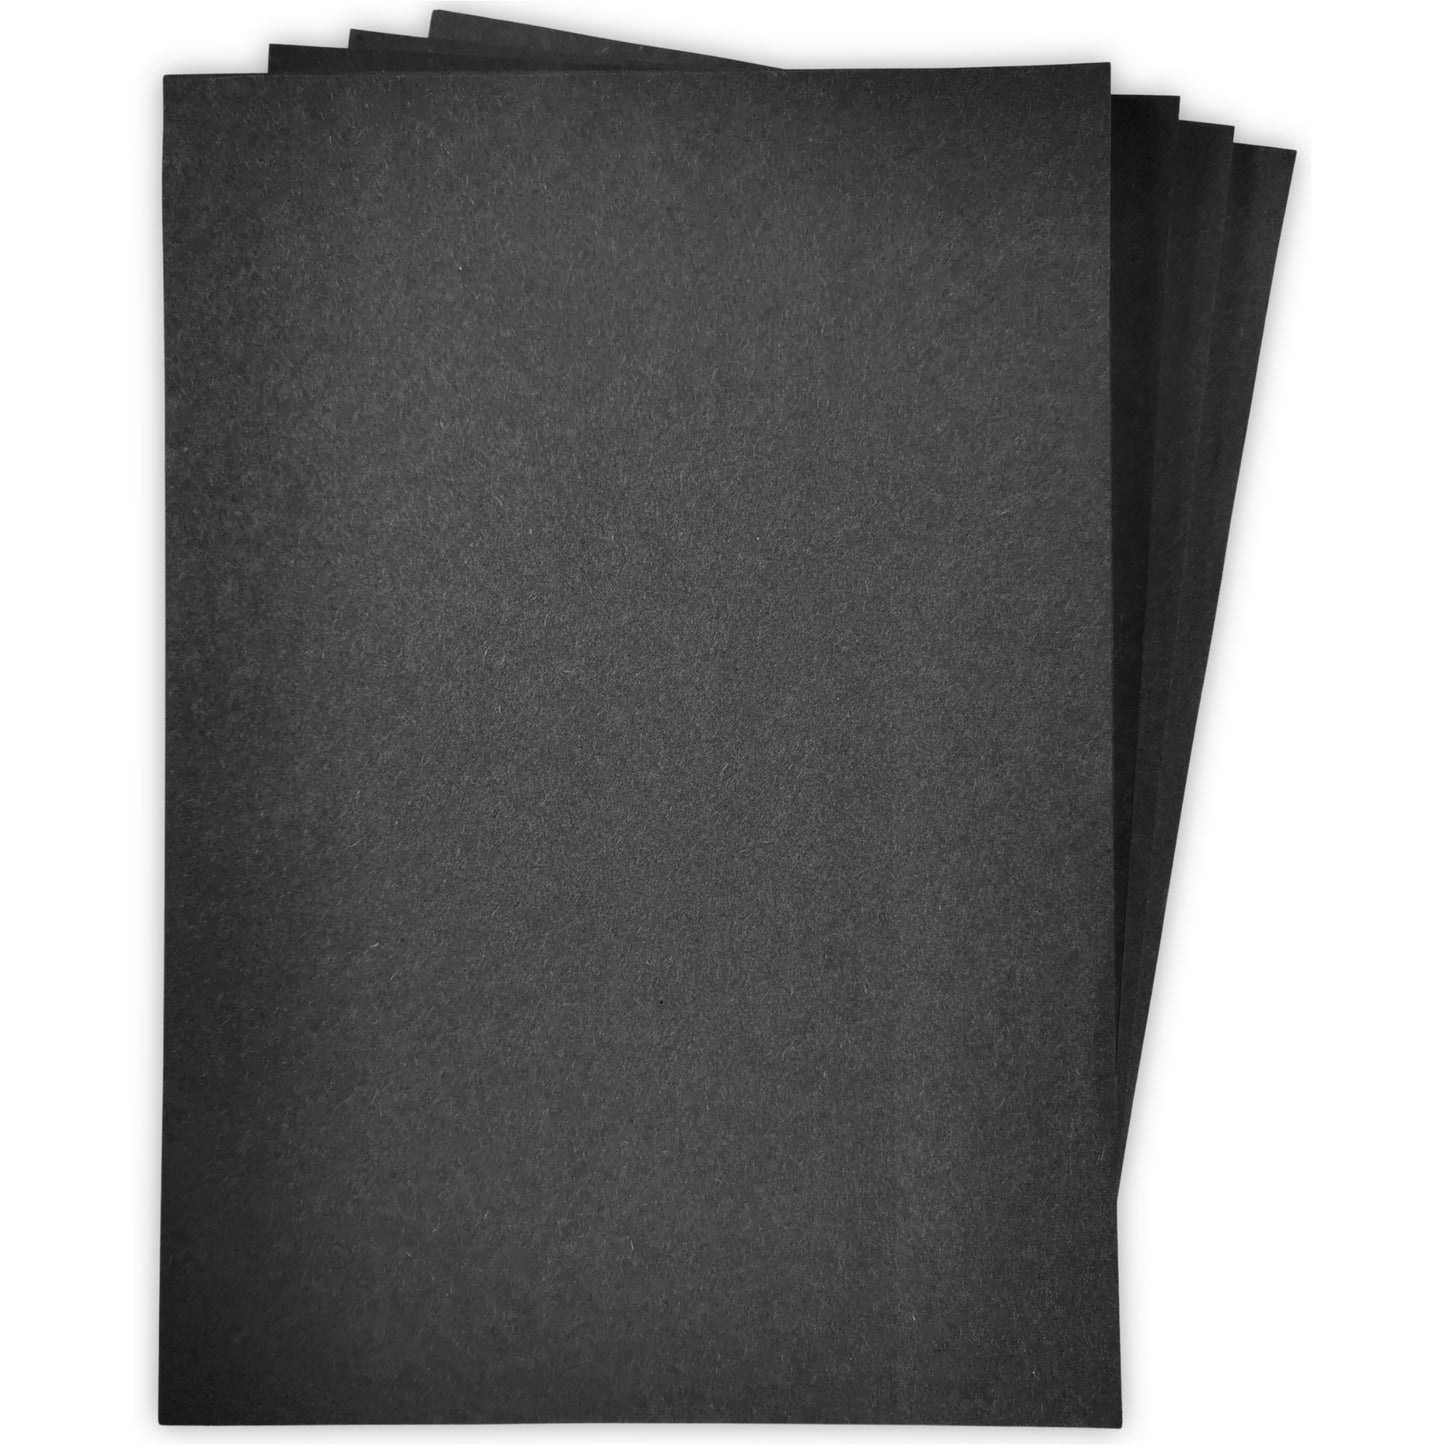 A4 100% Recycled Black Sugar Paper 100gsm